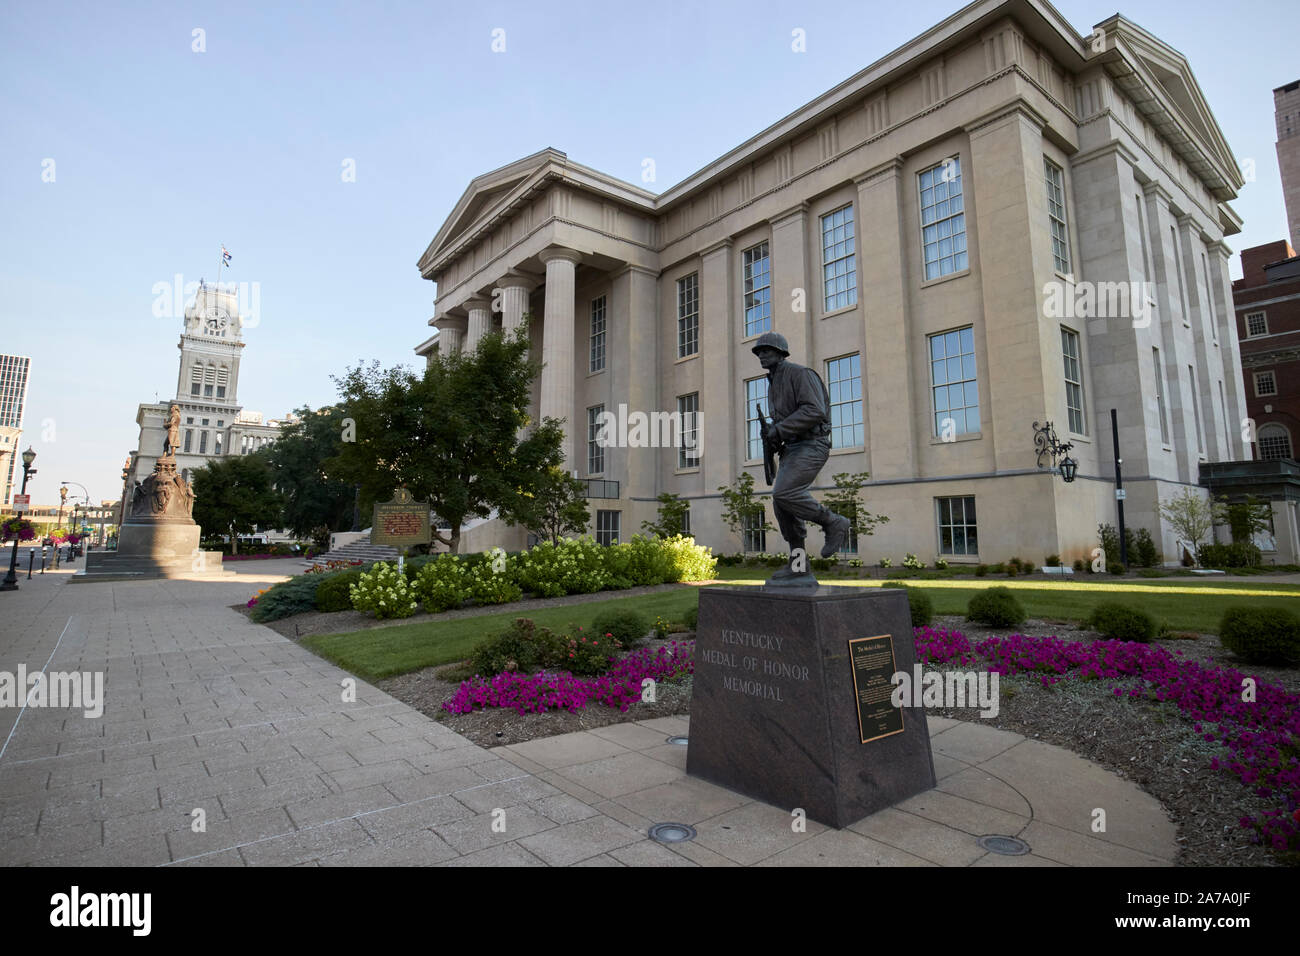 kentucky medal of honor memorial statue of john c. squires outside Metro Hall former Jefferson County Courthouse building louisville kentucky USA Stock Photo